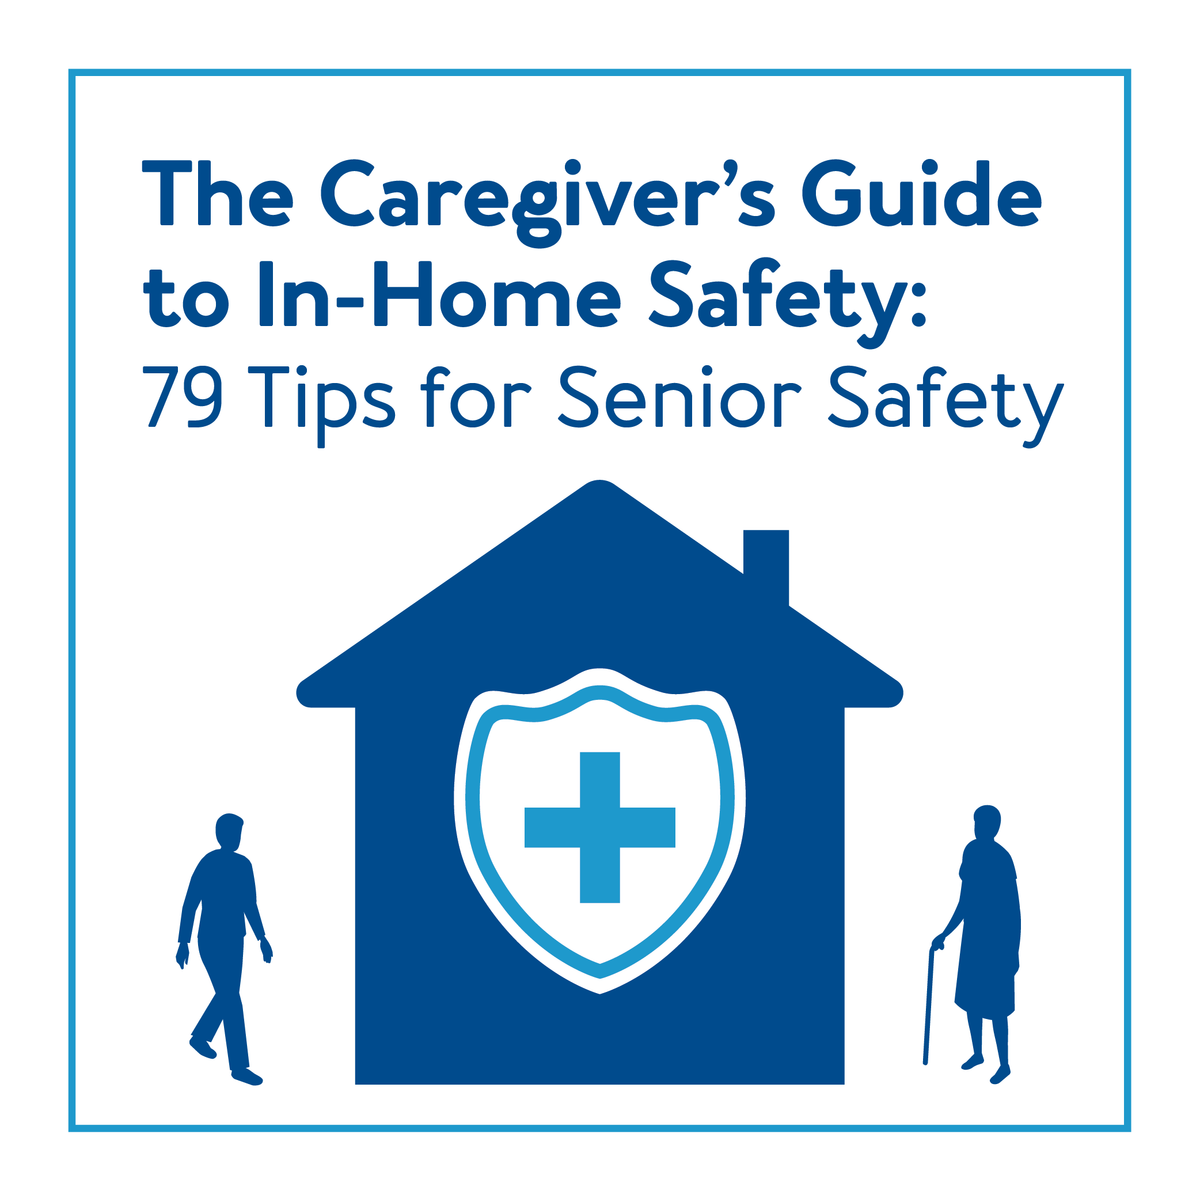 Home graphic with two outlines of people, text The Caregivers Guide to In-Home Safety: 79 Tips for Senior Safety